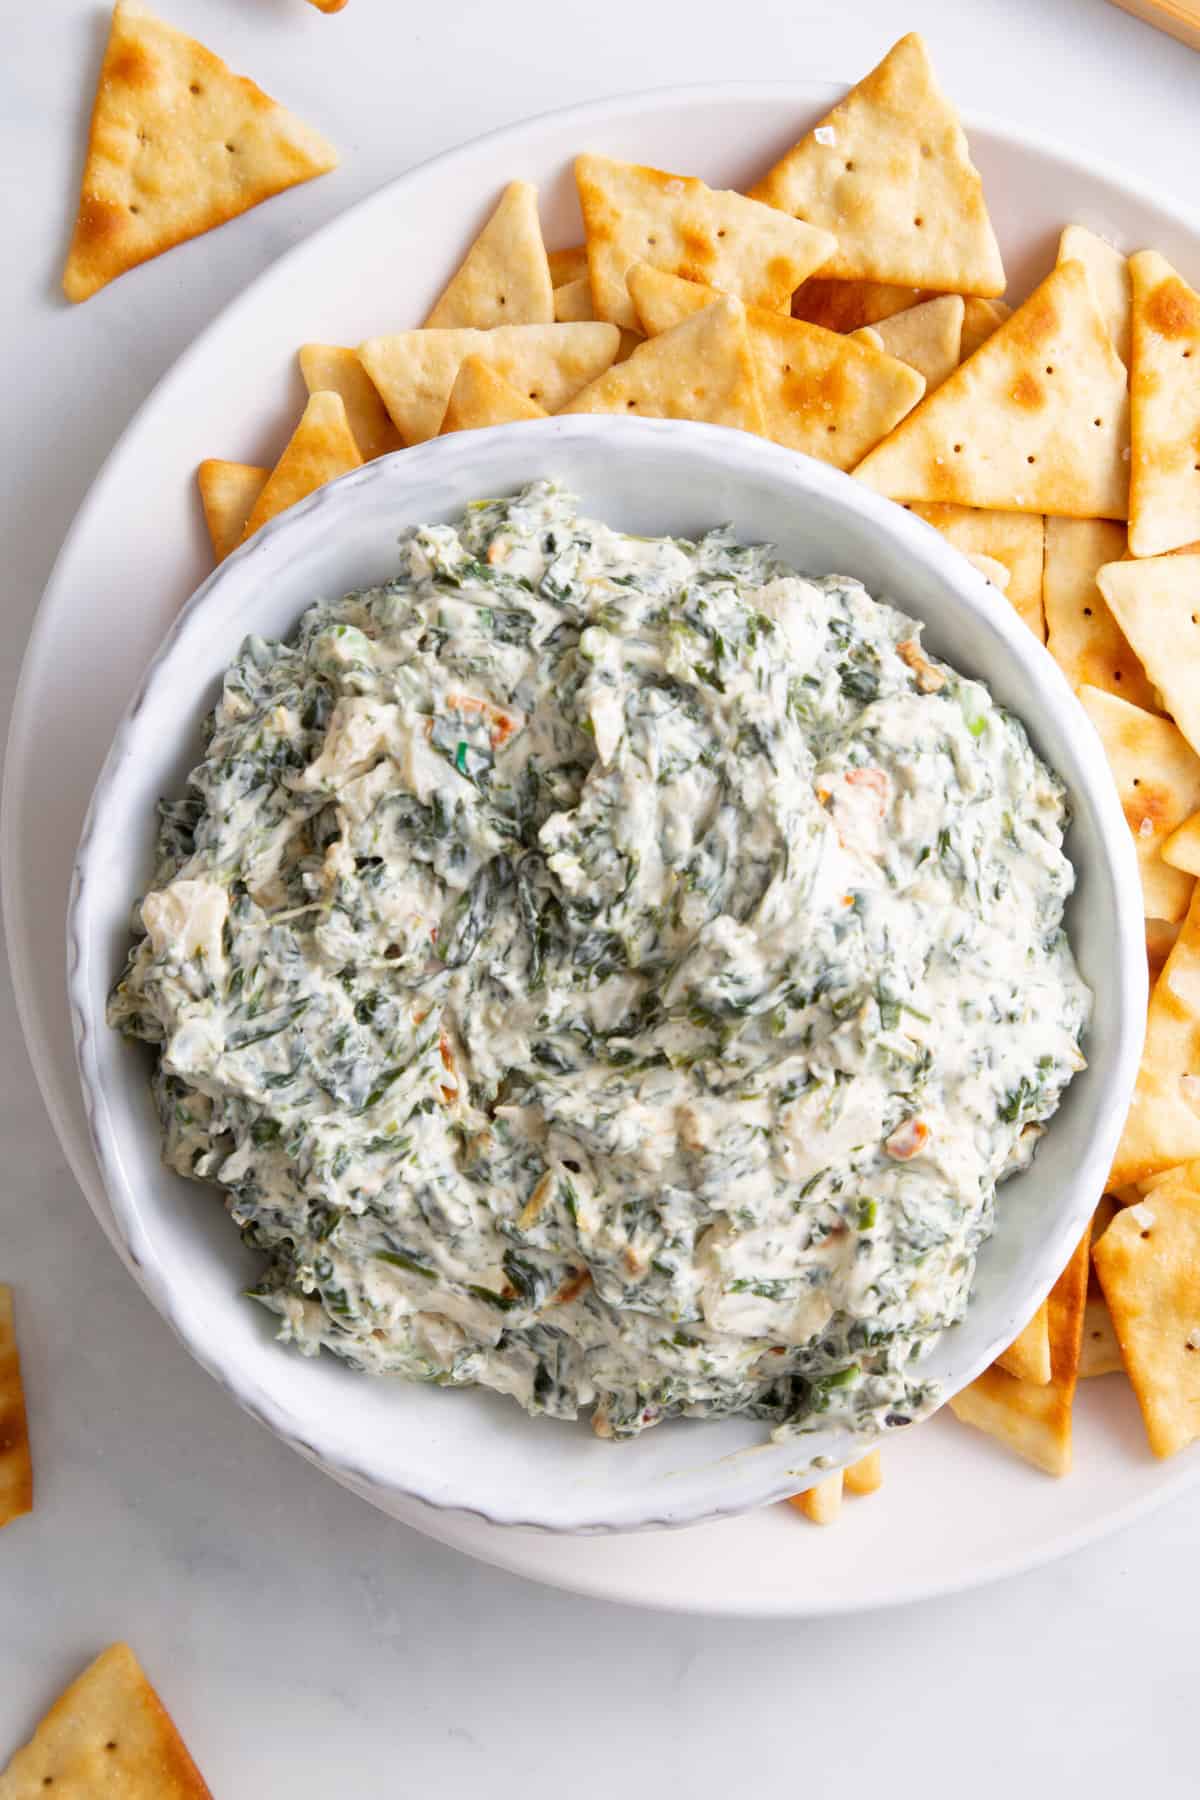 top down image of a bowl of spinach dip with a side of triangle shaped pita chips